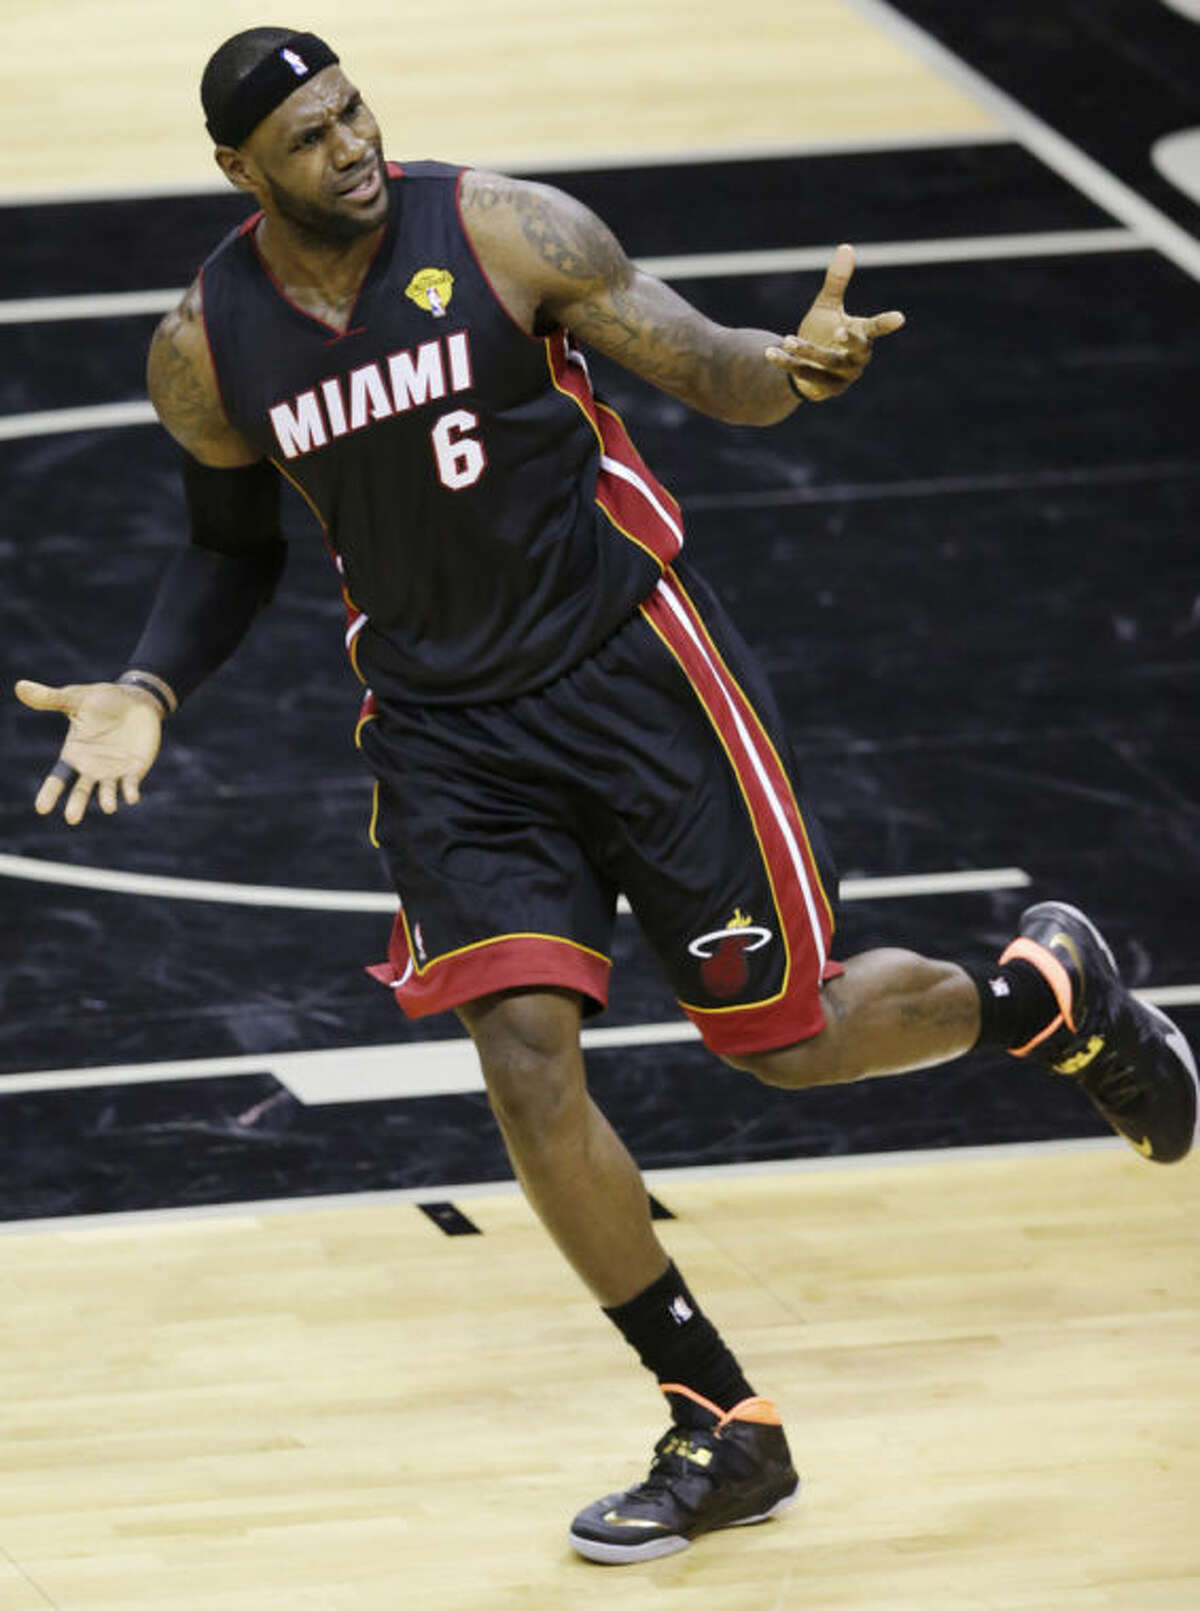 Miami Heat forward LeBron James (6) appeals to an official during the first half in Game 2 of the NBA basketball finals against the San Antonio Spurs on Sunday, June 8, 2014, in San Antonio. (AP Photo/Tony Gutierrez)